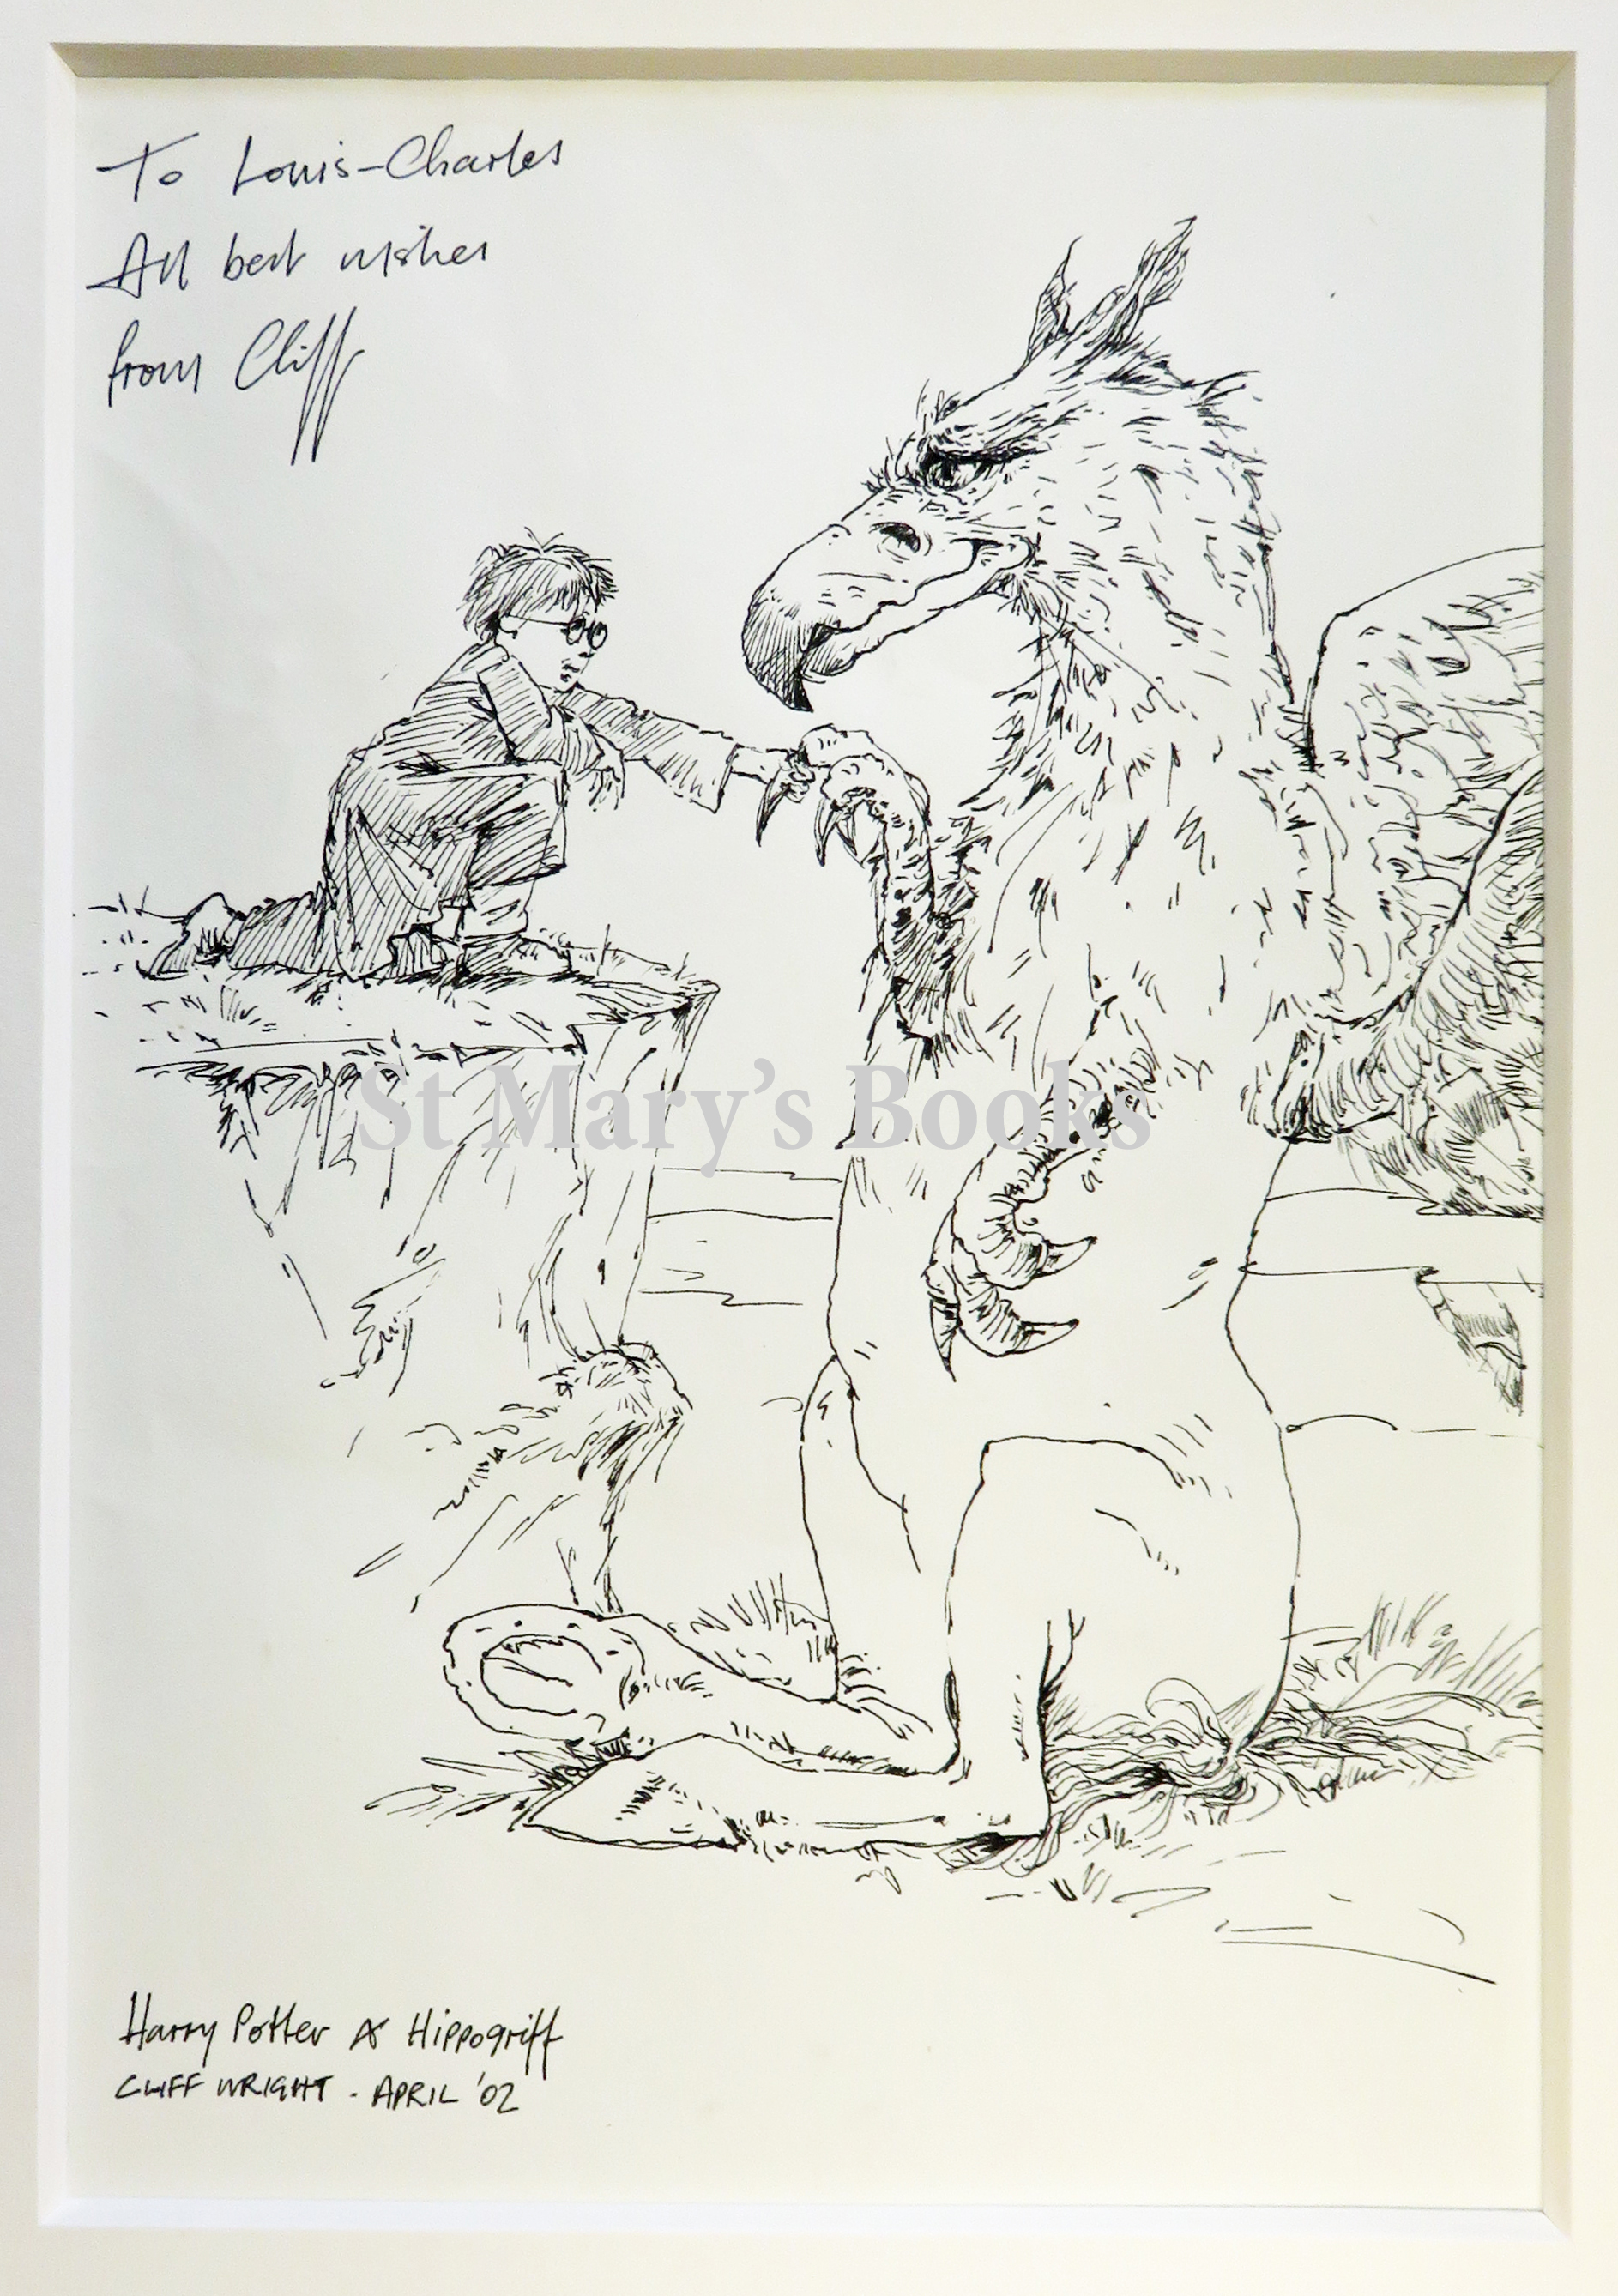 Harry Potter & Hippogriff. Original Sketch by Cliff Wright